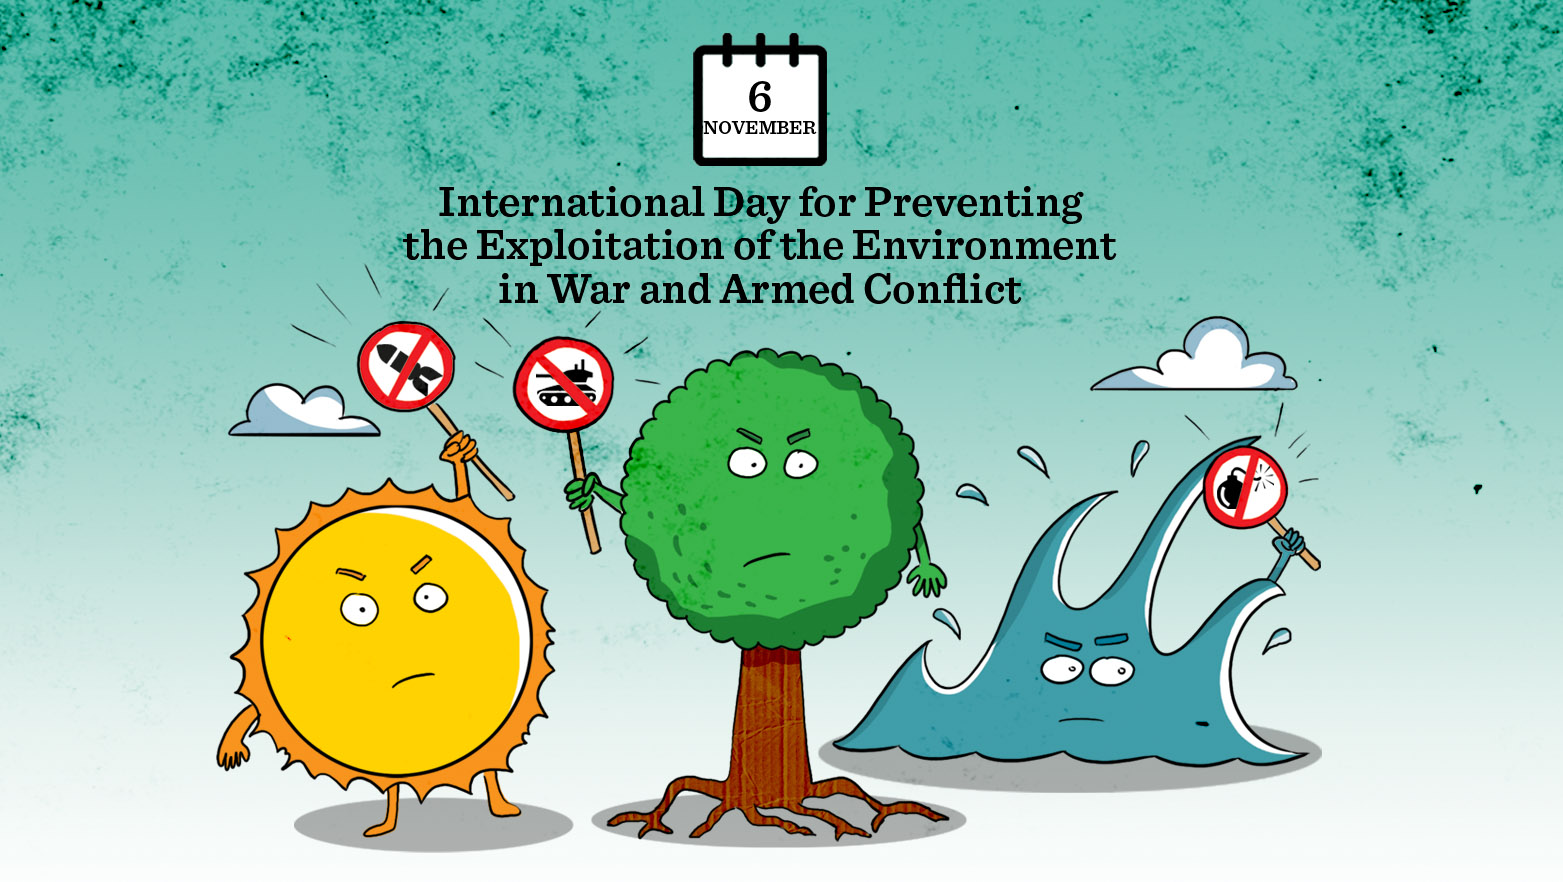 International Day for preventing the exploitation of the environment in war and armed conflict